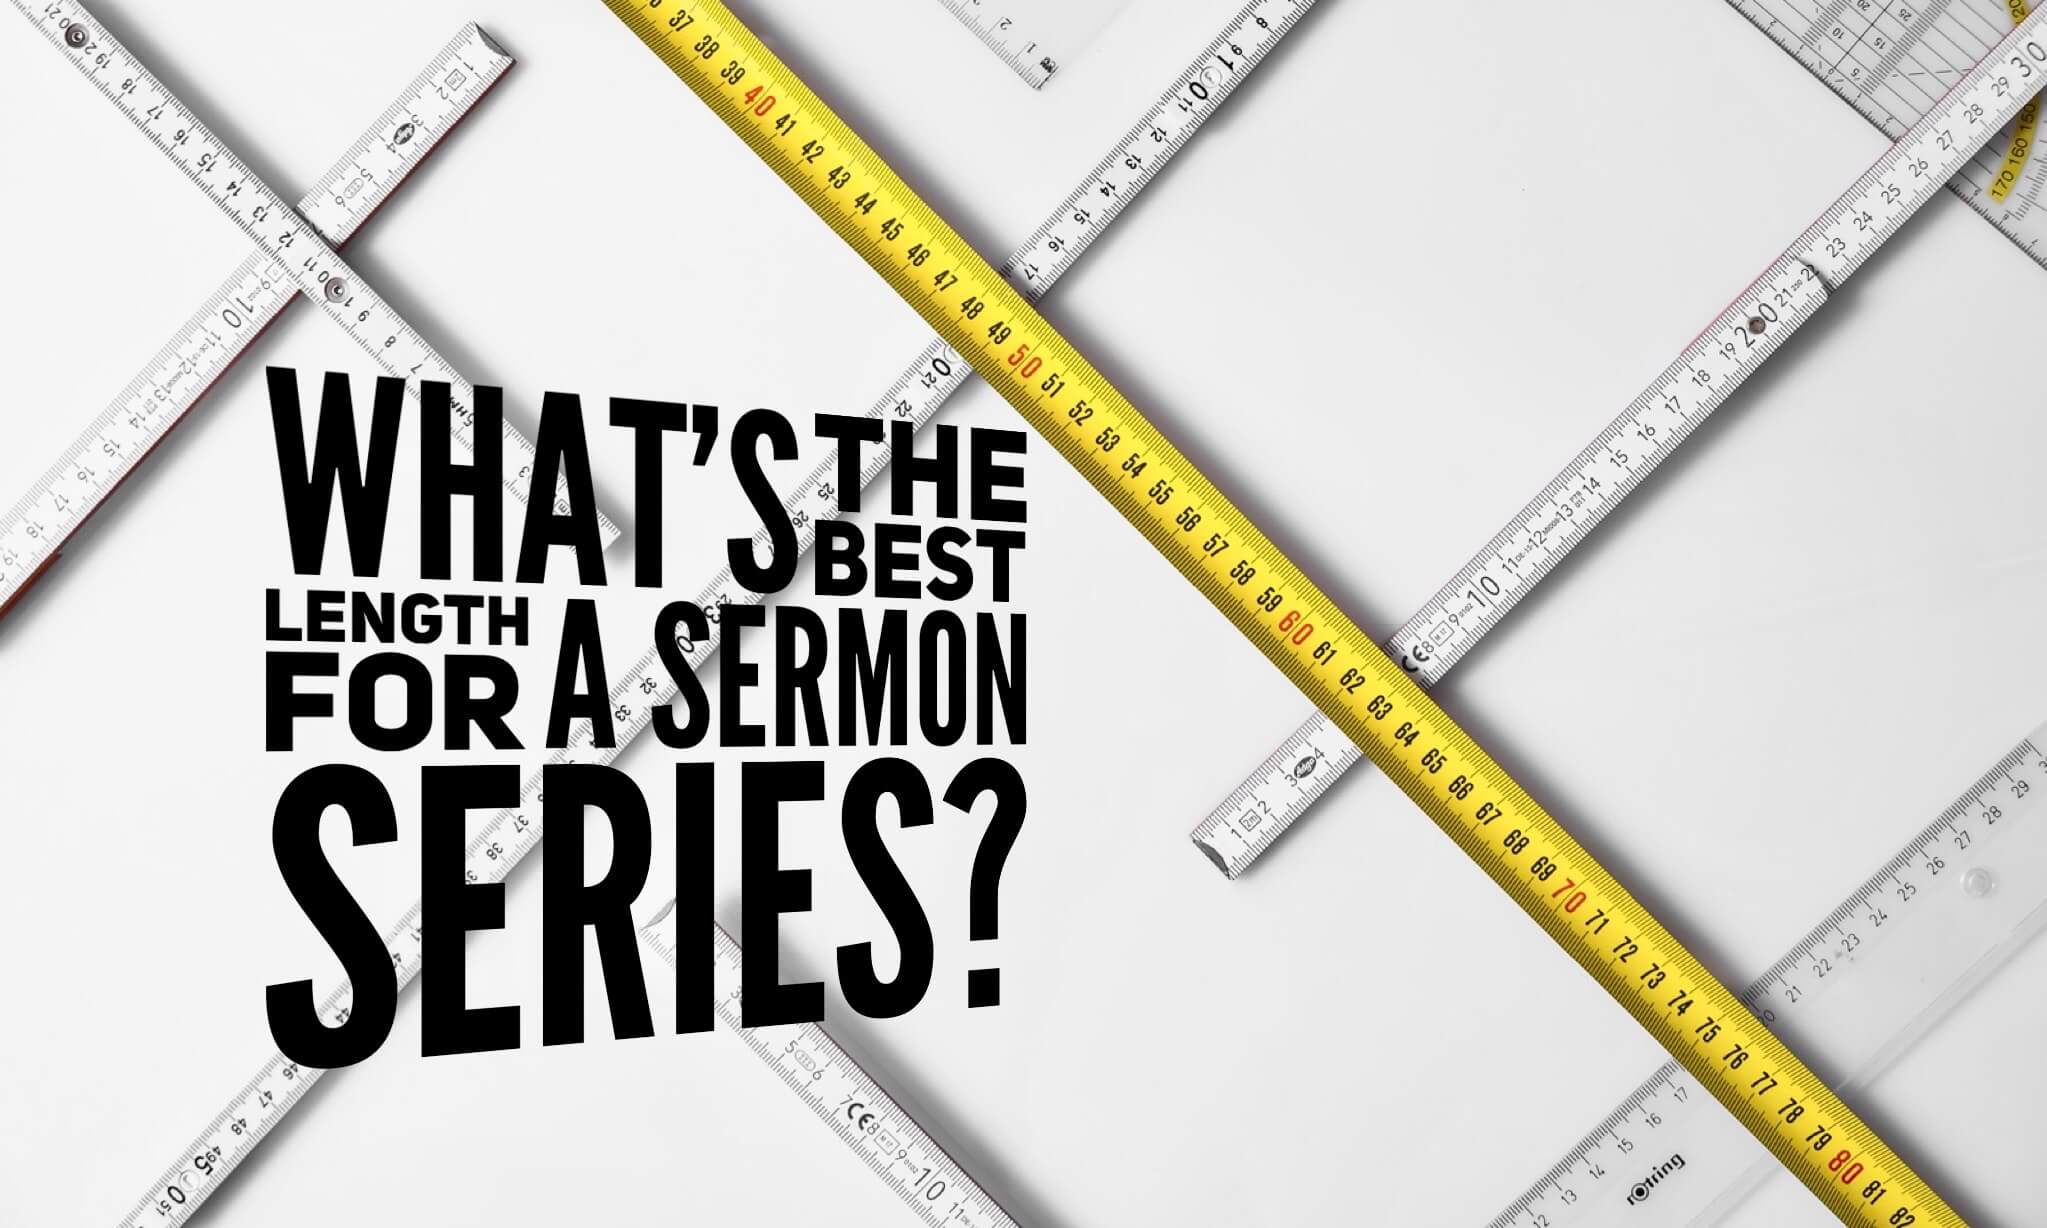 What’s the Best Length for a Sermon Series?